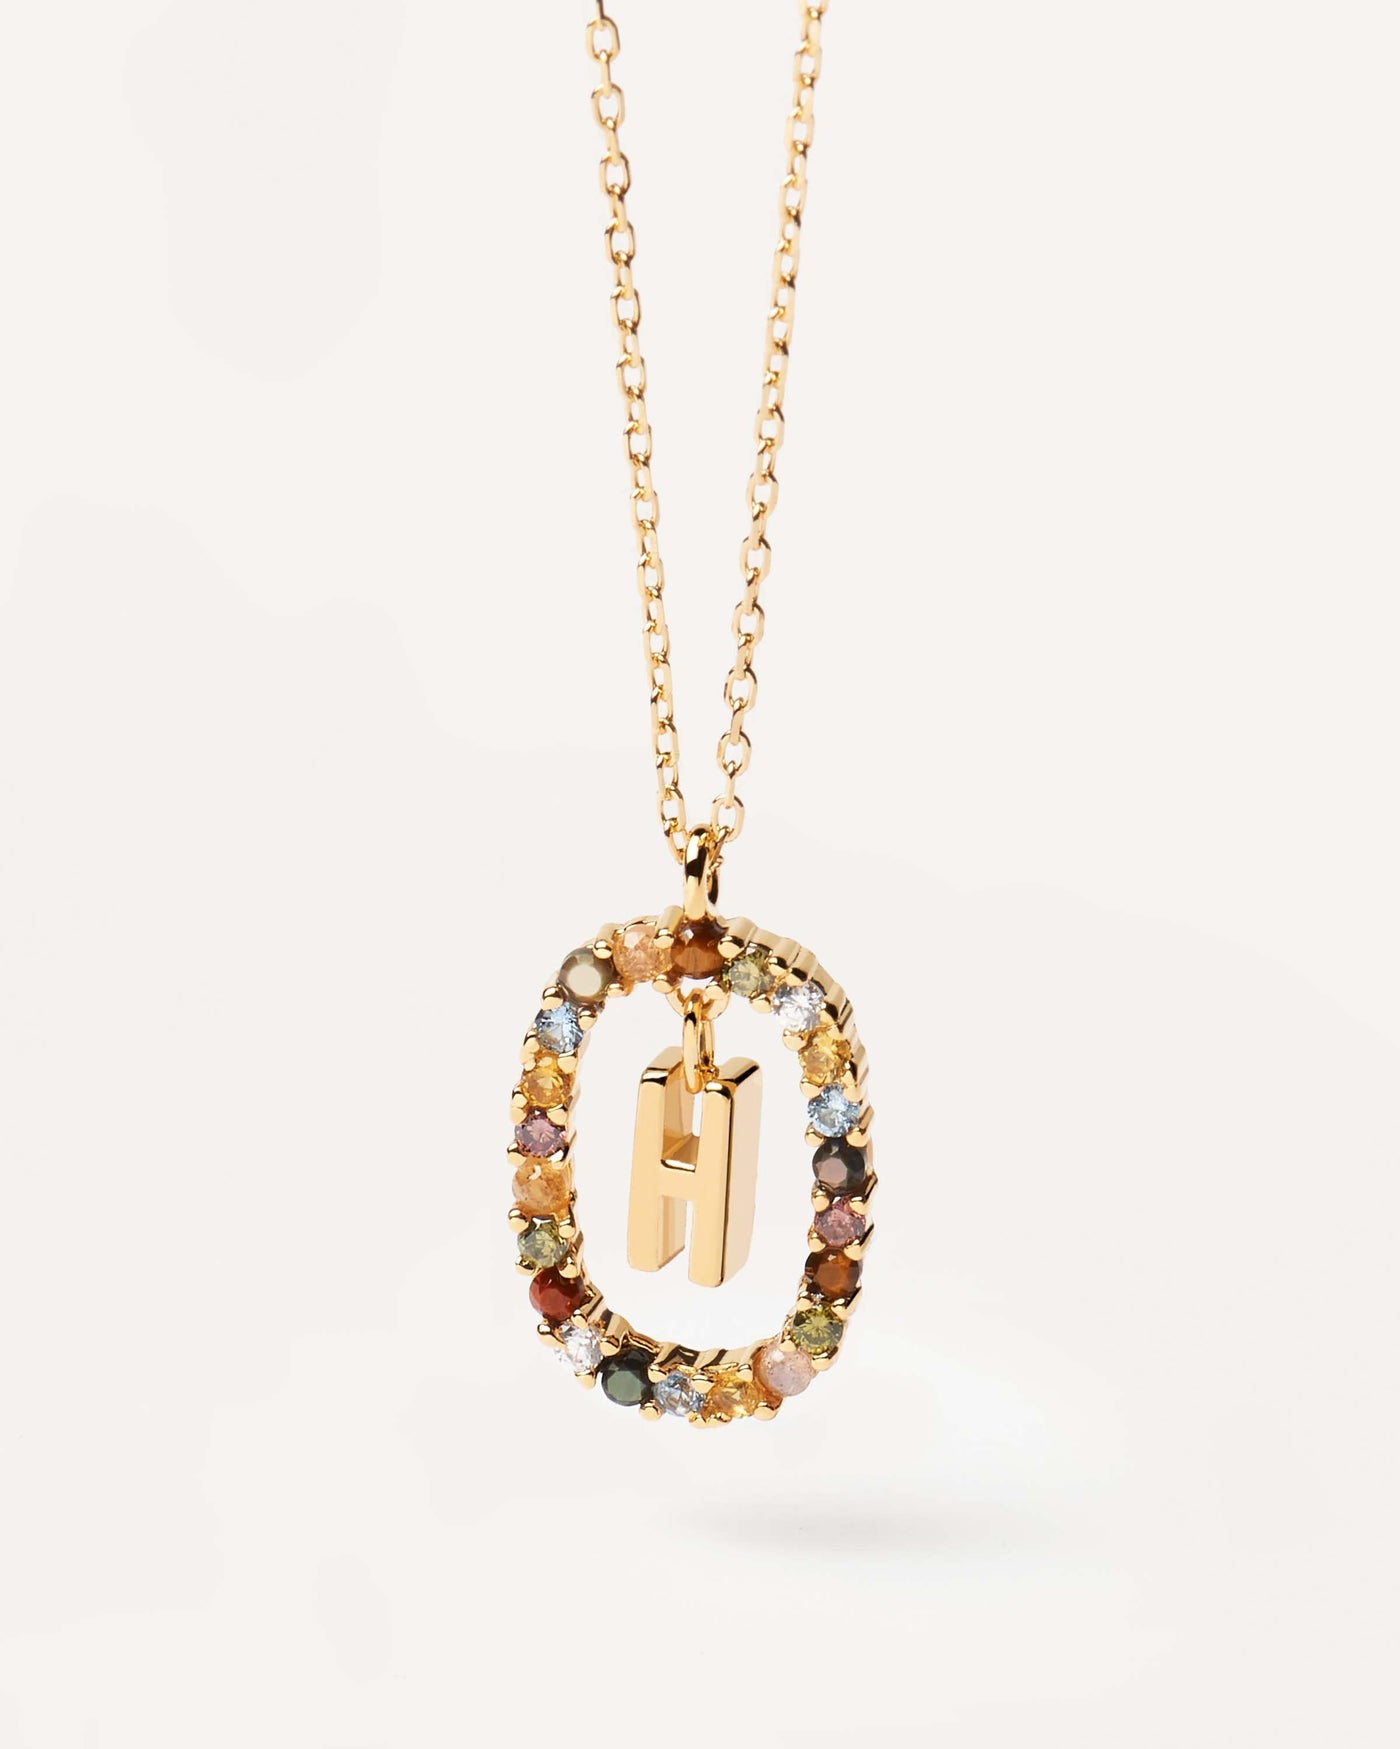 2023 Selection | Letter H necklace. Initial H necklace in gold-plated silver, circled by colorful gemstones. Get the latest arrival from PDPAOLA. Place your order safely and get this Best Seller. Free Shipping.